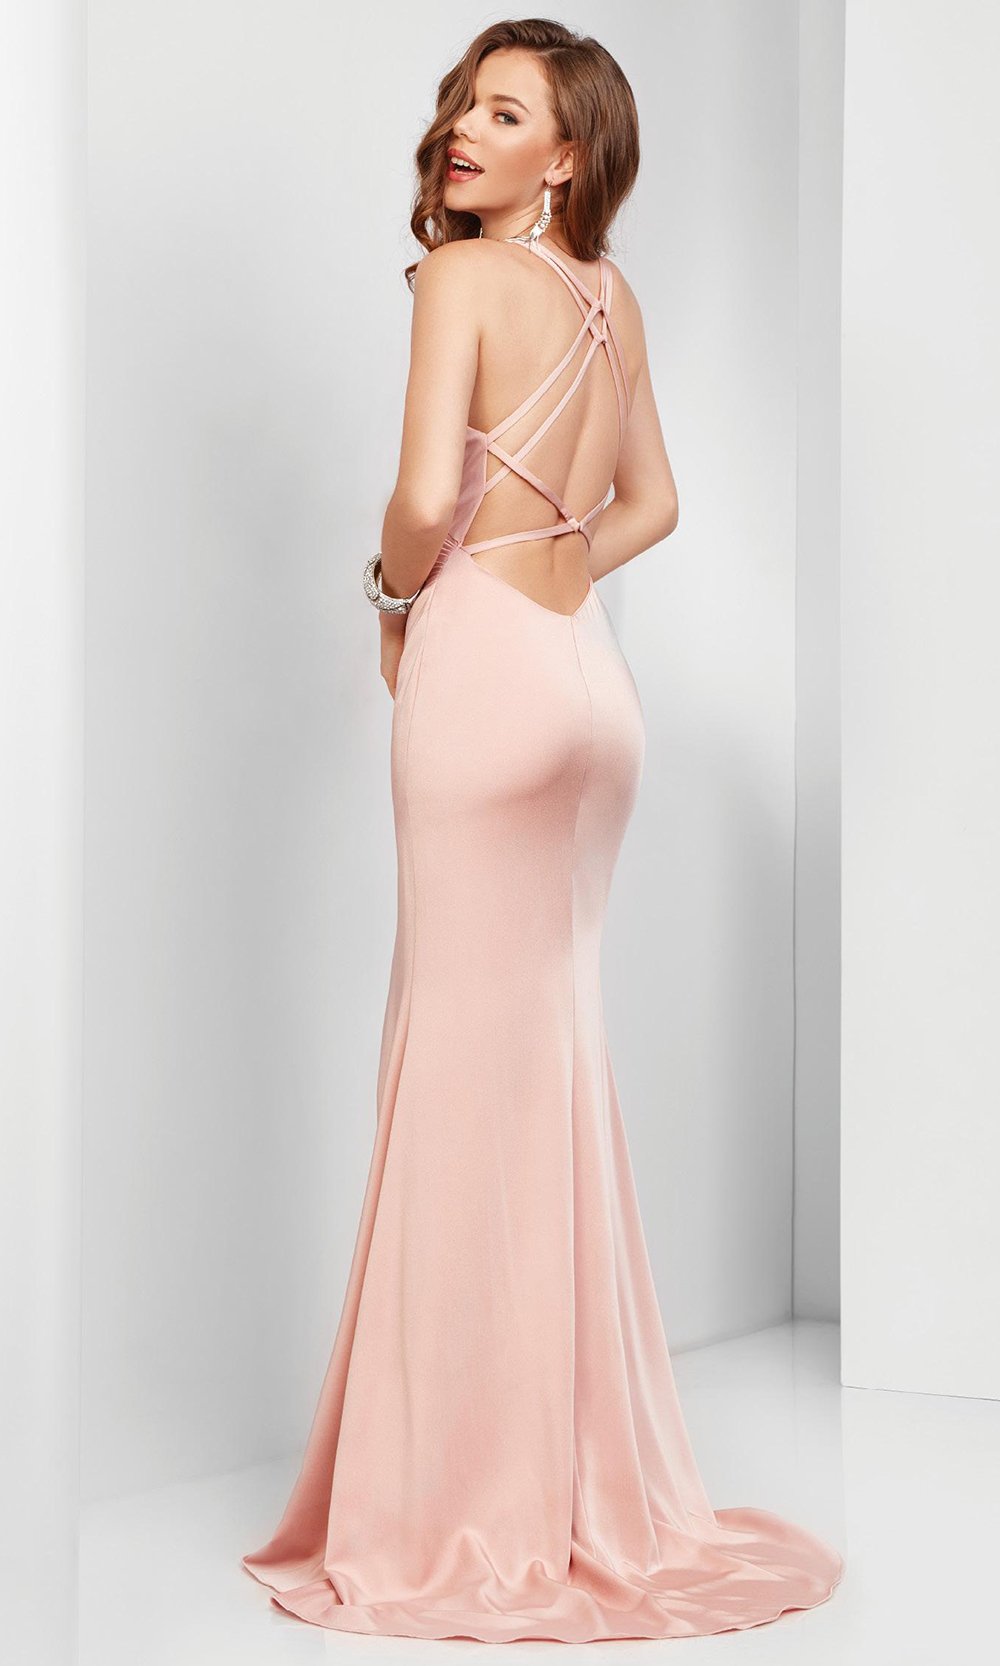 Clarisse - 3456 Plunging V-neck Sheath Satin Gown in Pink